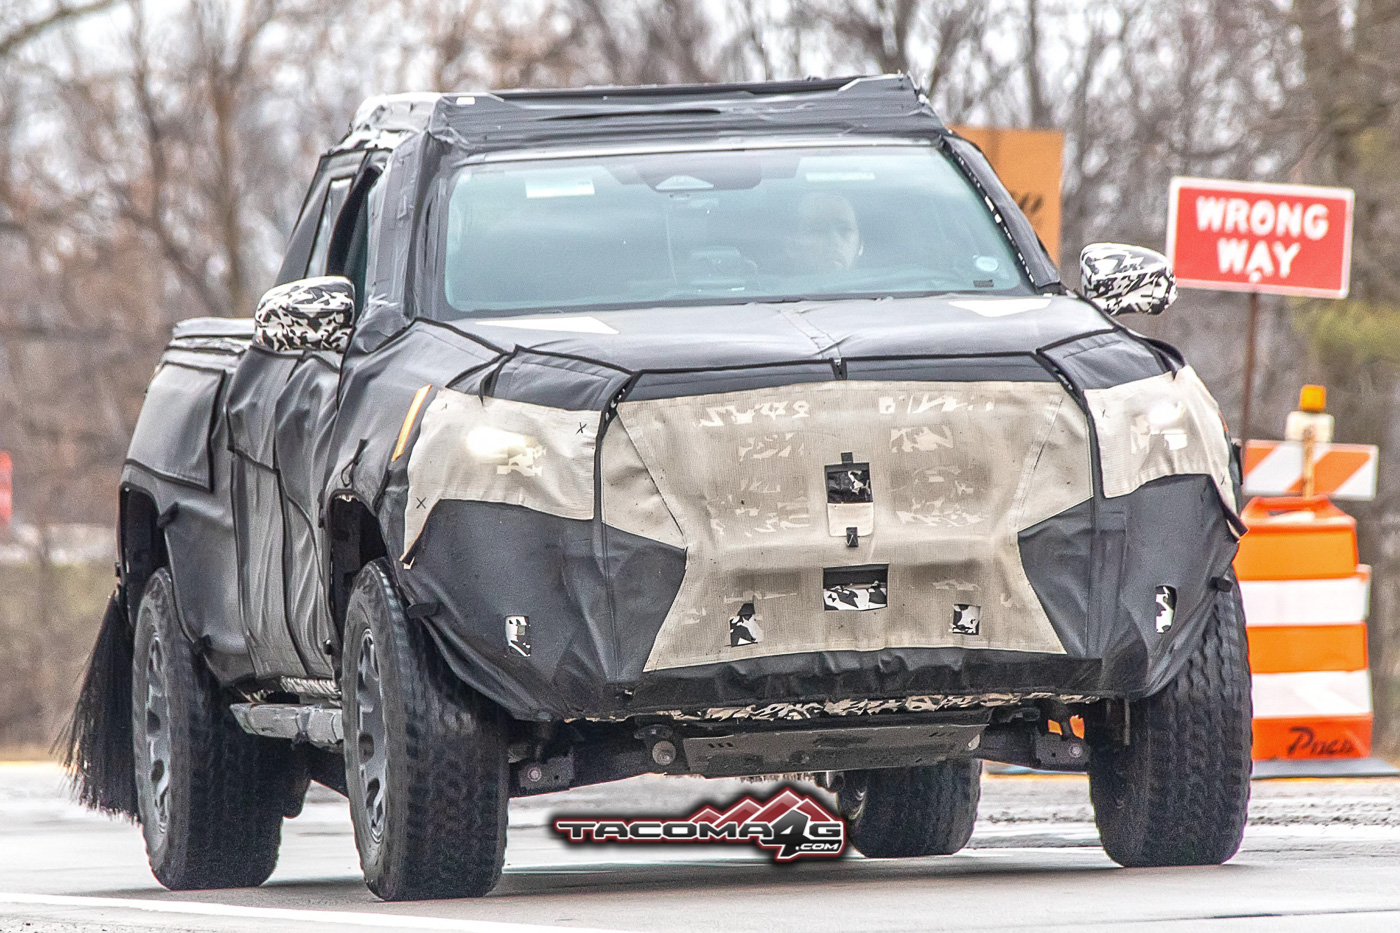 2024 Tacoma Spied: 2024 Toyota Tacoma TRD Pro / Trailhunter Prototype 1st Sighting Reveals Rugged Off-Road Details + Rear Disc Brakes 📸 2024-toyota-tacoma-trd-pro-prototype-2